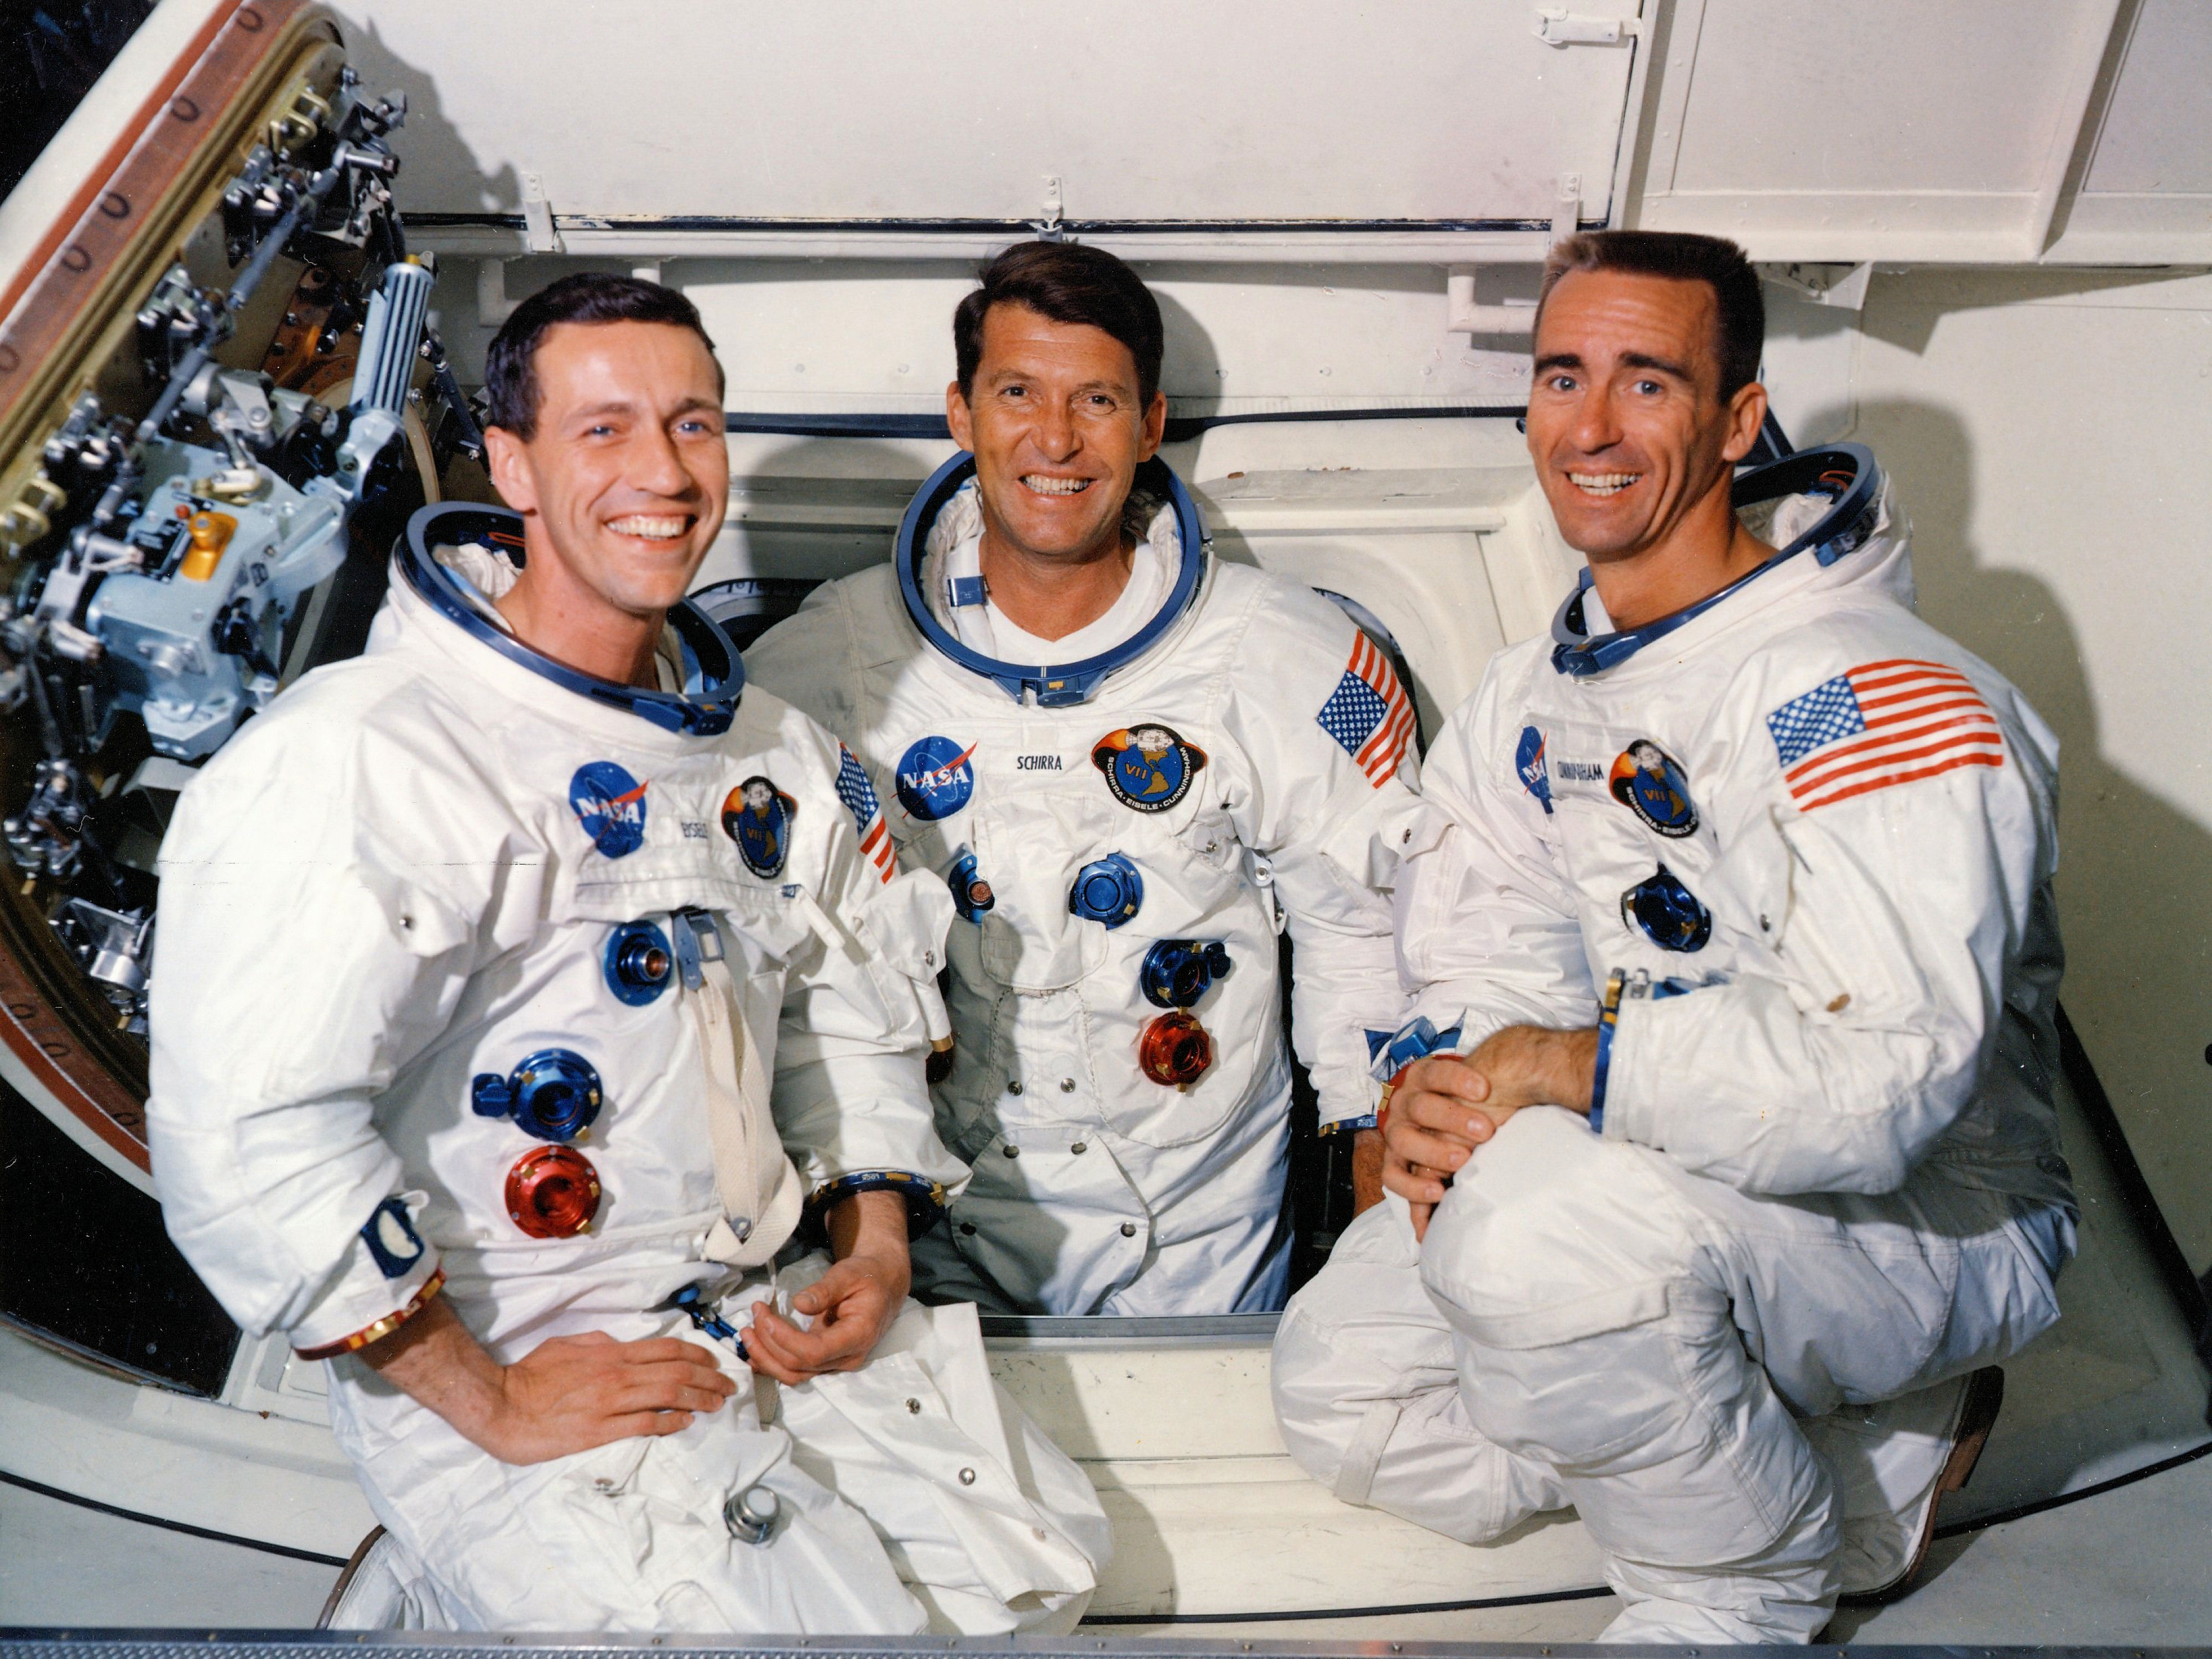 http://www.gbphotodidactical.ca/images/wallpaper-NASA-50-A-Crew-of-Apollo-7-1968-05-22-fs.jpg